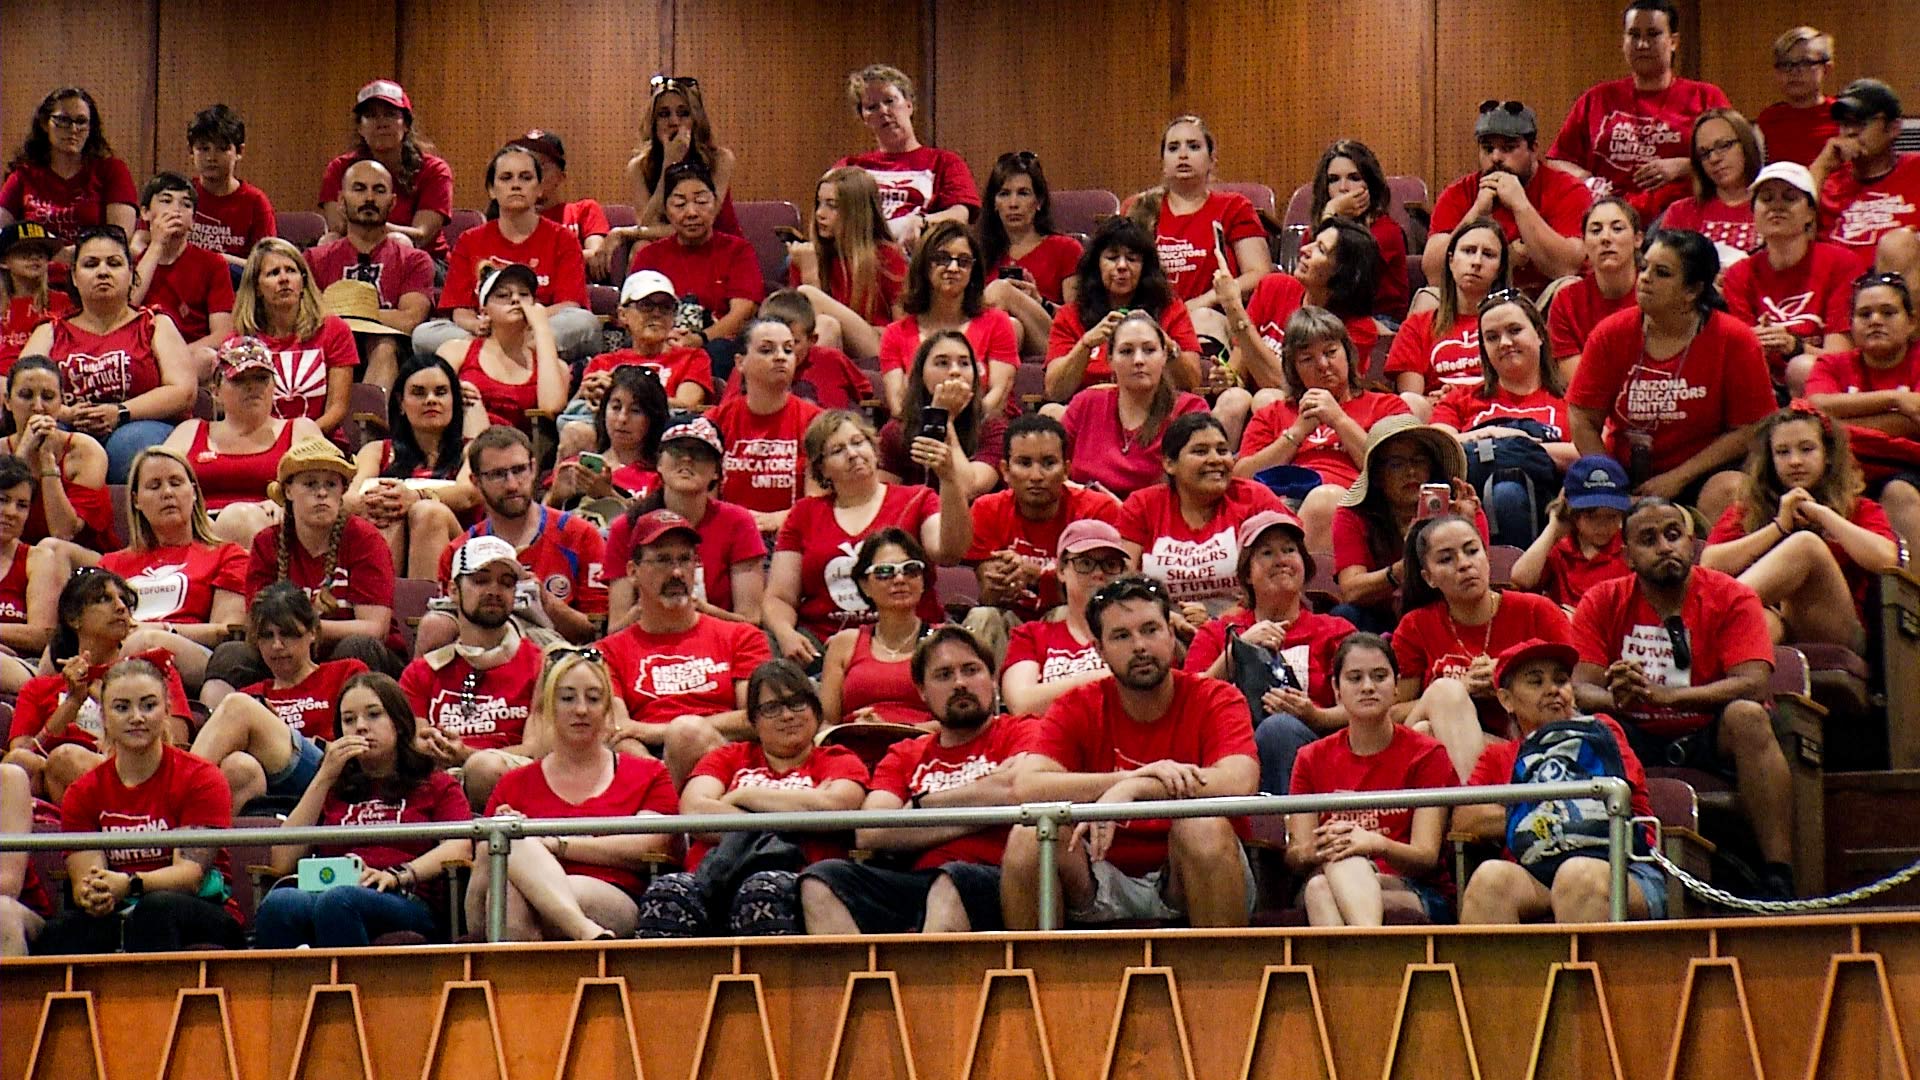 Educators and supporters with the #RedForEd movement fill the gallery at the Arizona House on April 30, 2018, the third day of a historic teacher walkout.